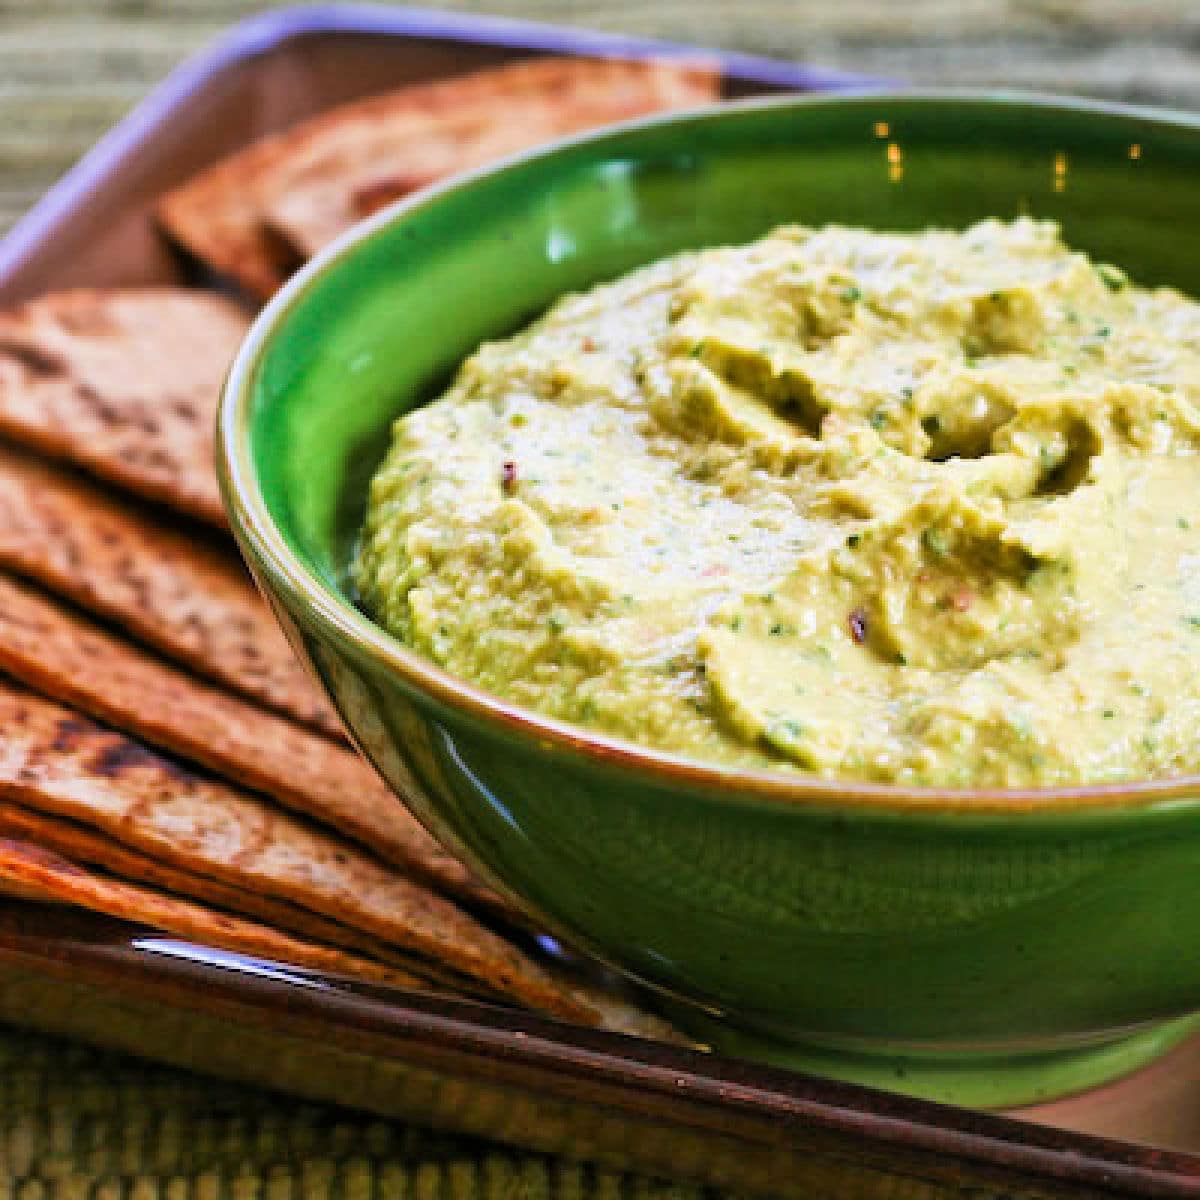 Parsley Hummus shown in serving bowl with low-carb pita bread.